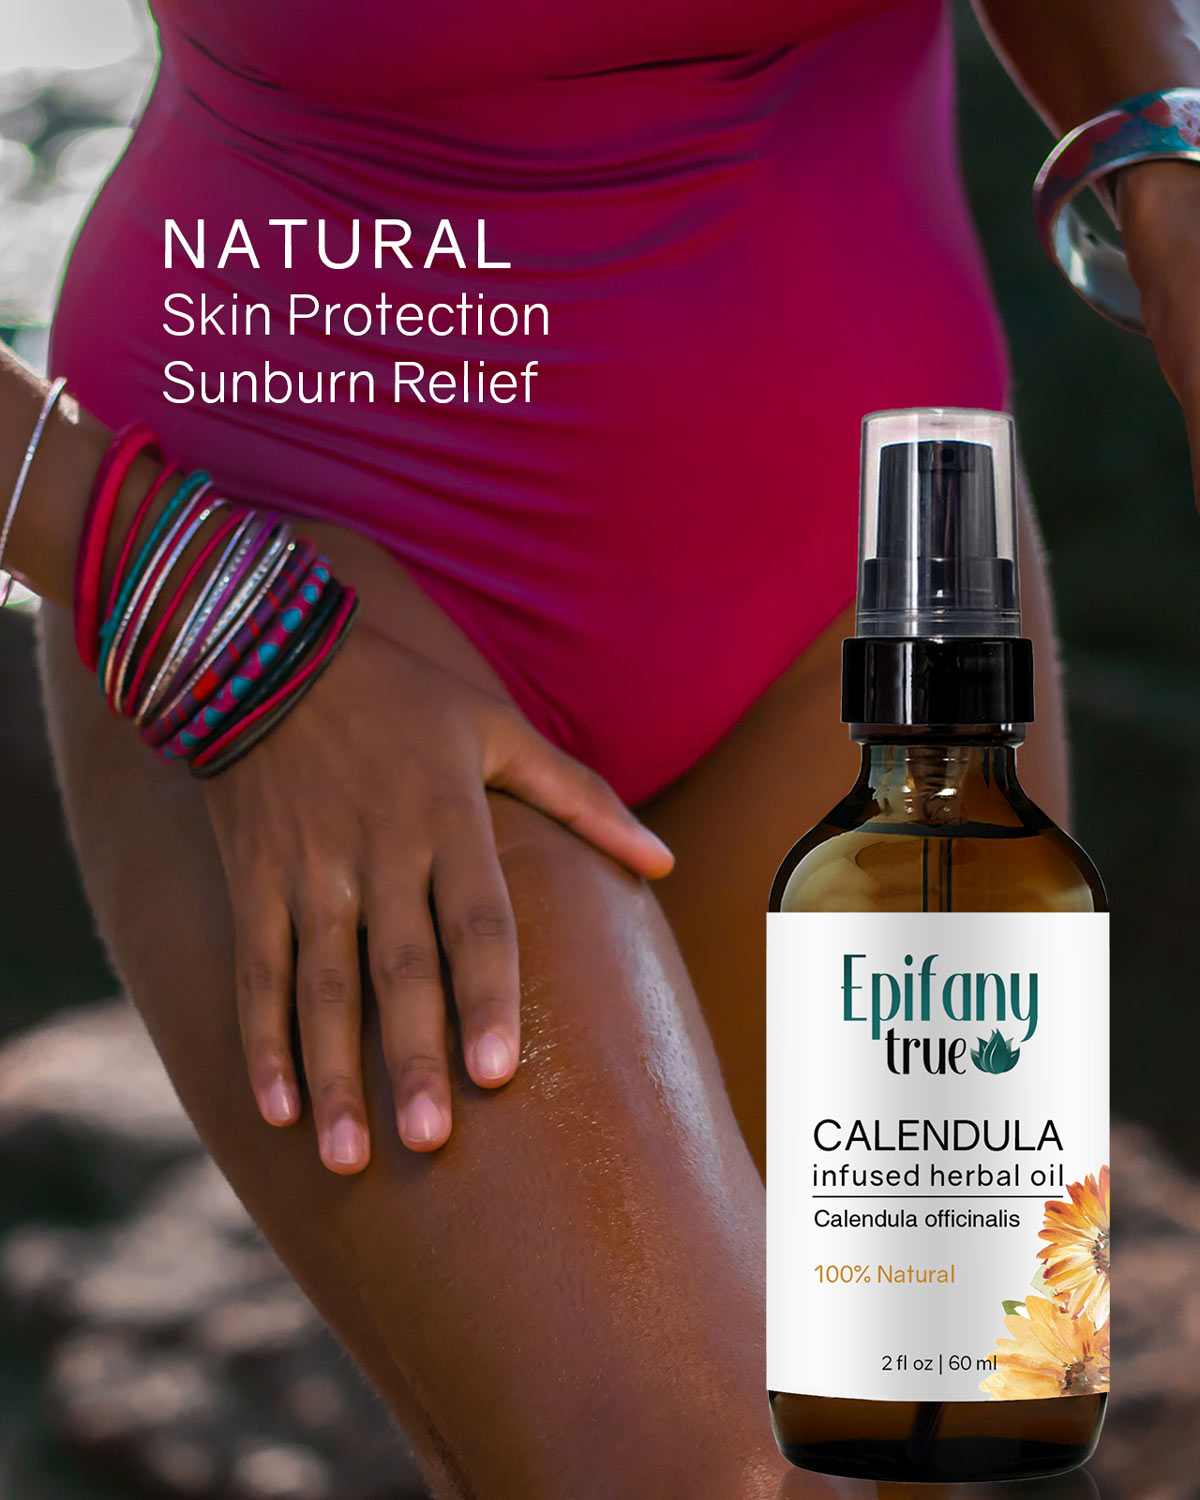 Epifany True Calendula Oil is natural for skin protection and sunburn relief.